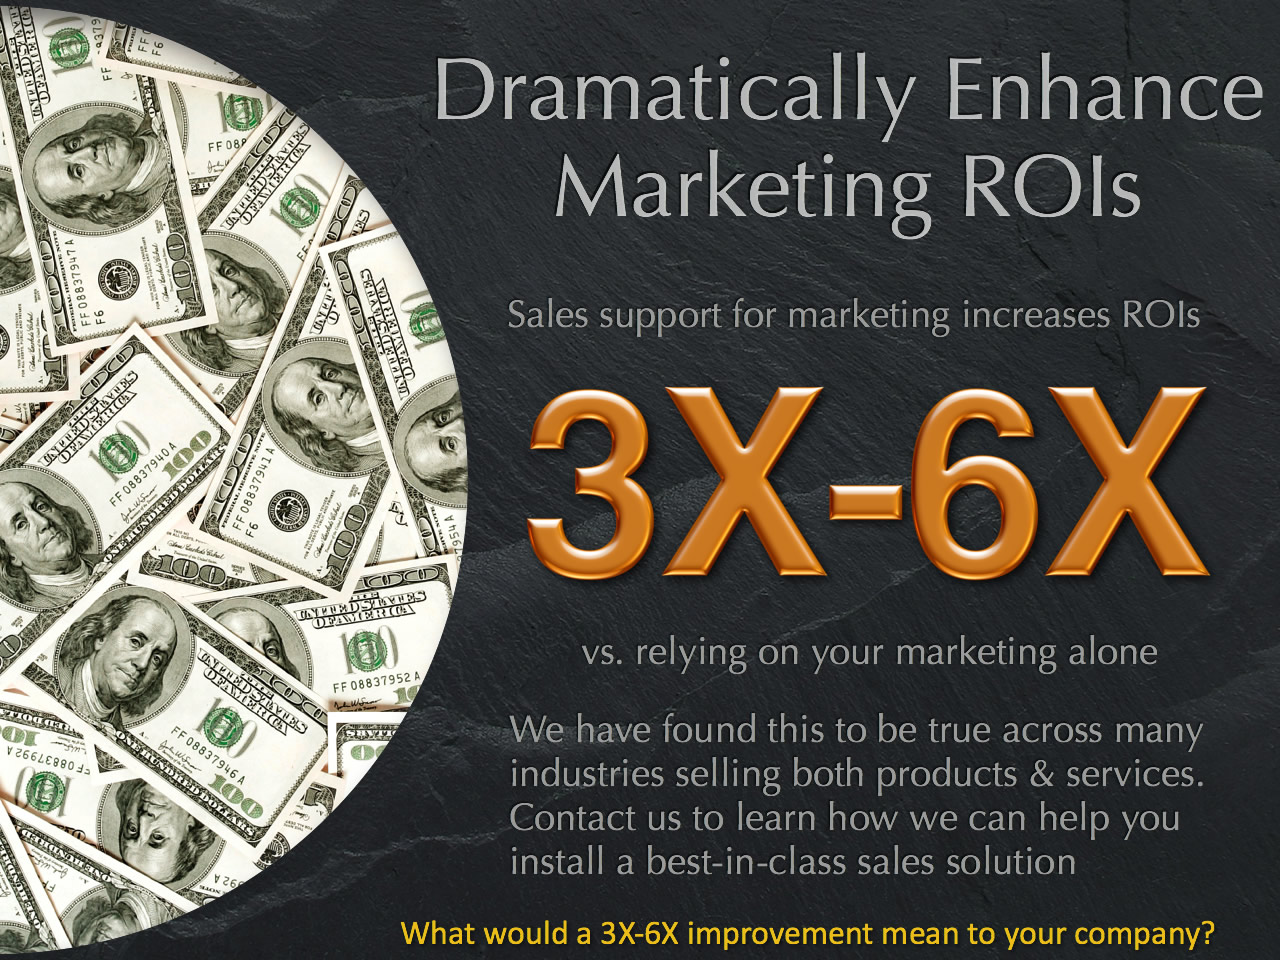 Sales team support for a marketing-only business can lift sales 3 to 6 times vs. marketing alone